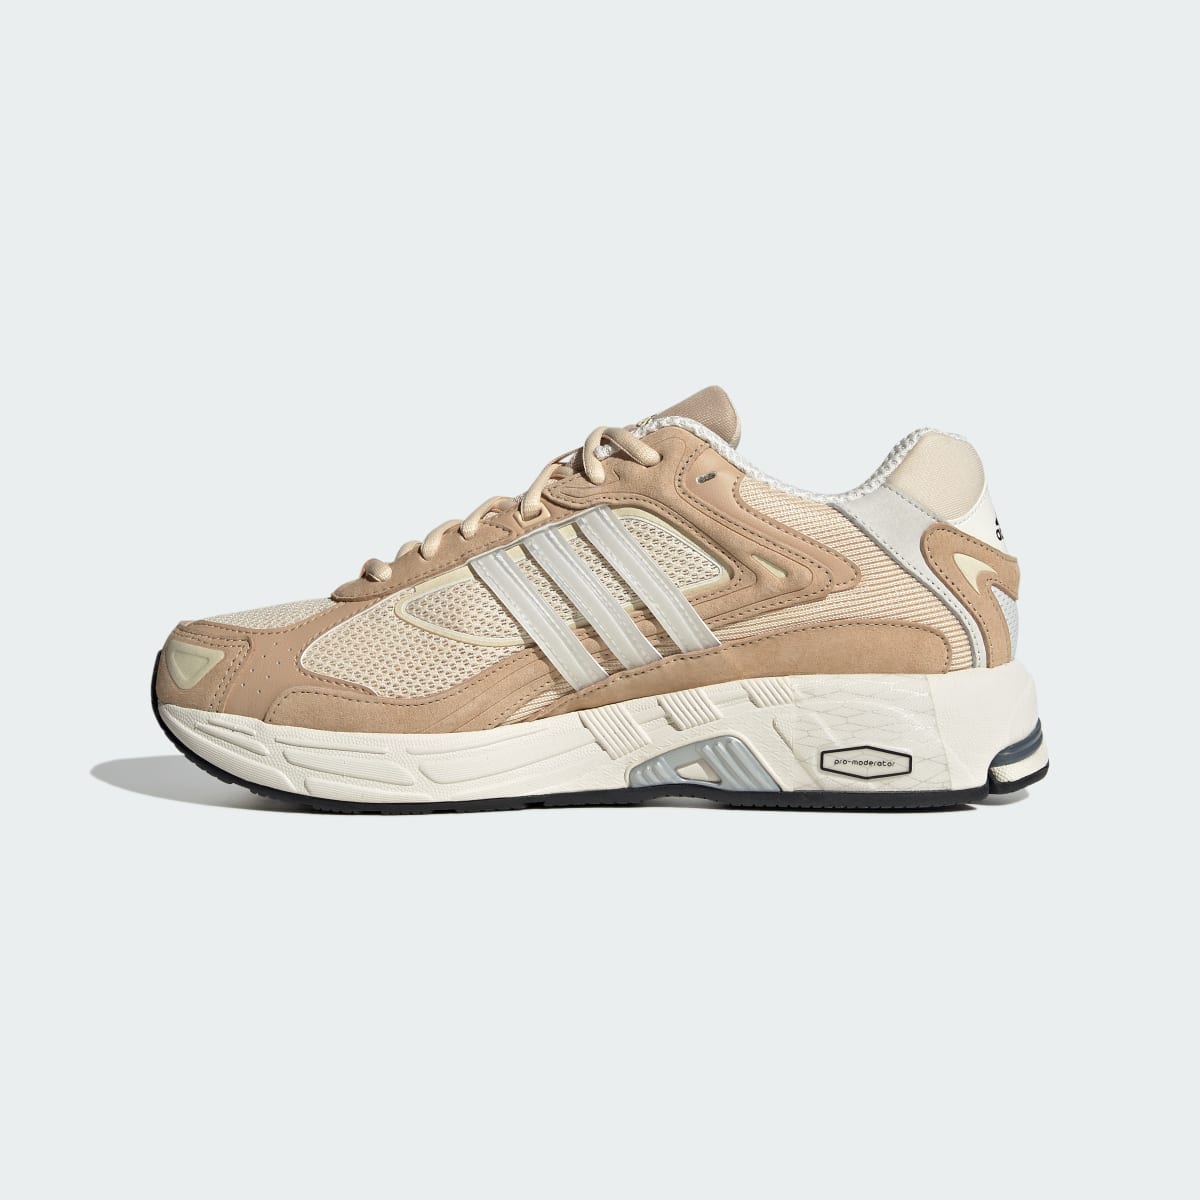 Adidas Chaussure Response CL. 7